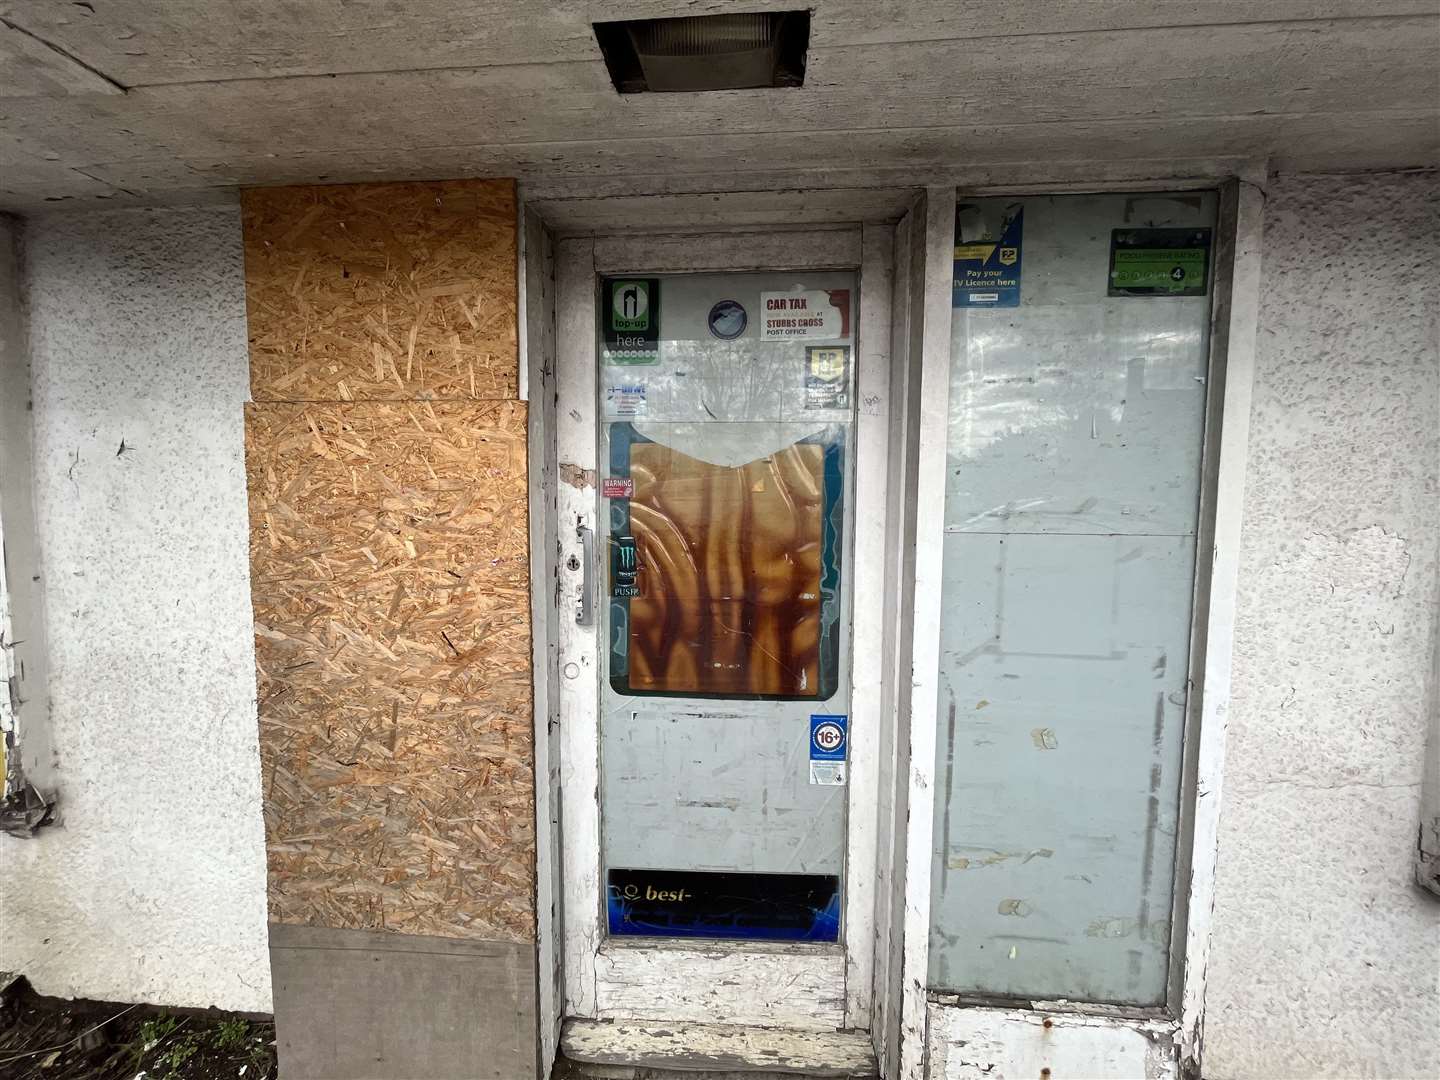 Residents have welcomed the plans for housing to replace the "eyesore" shop